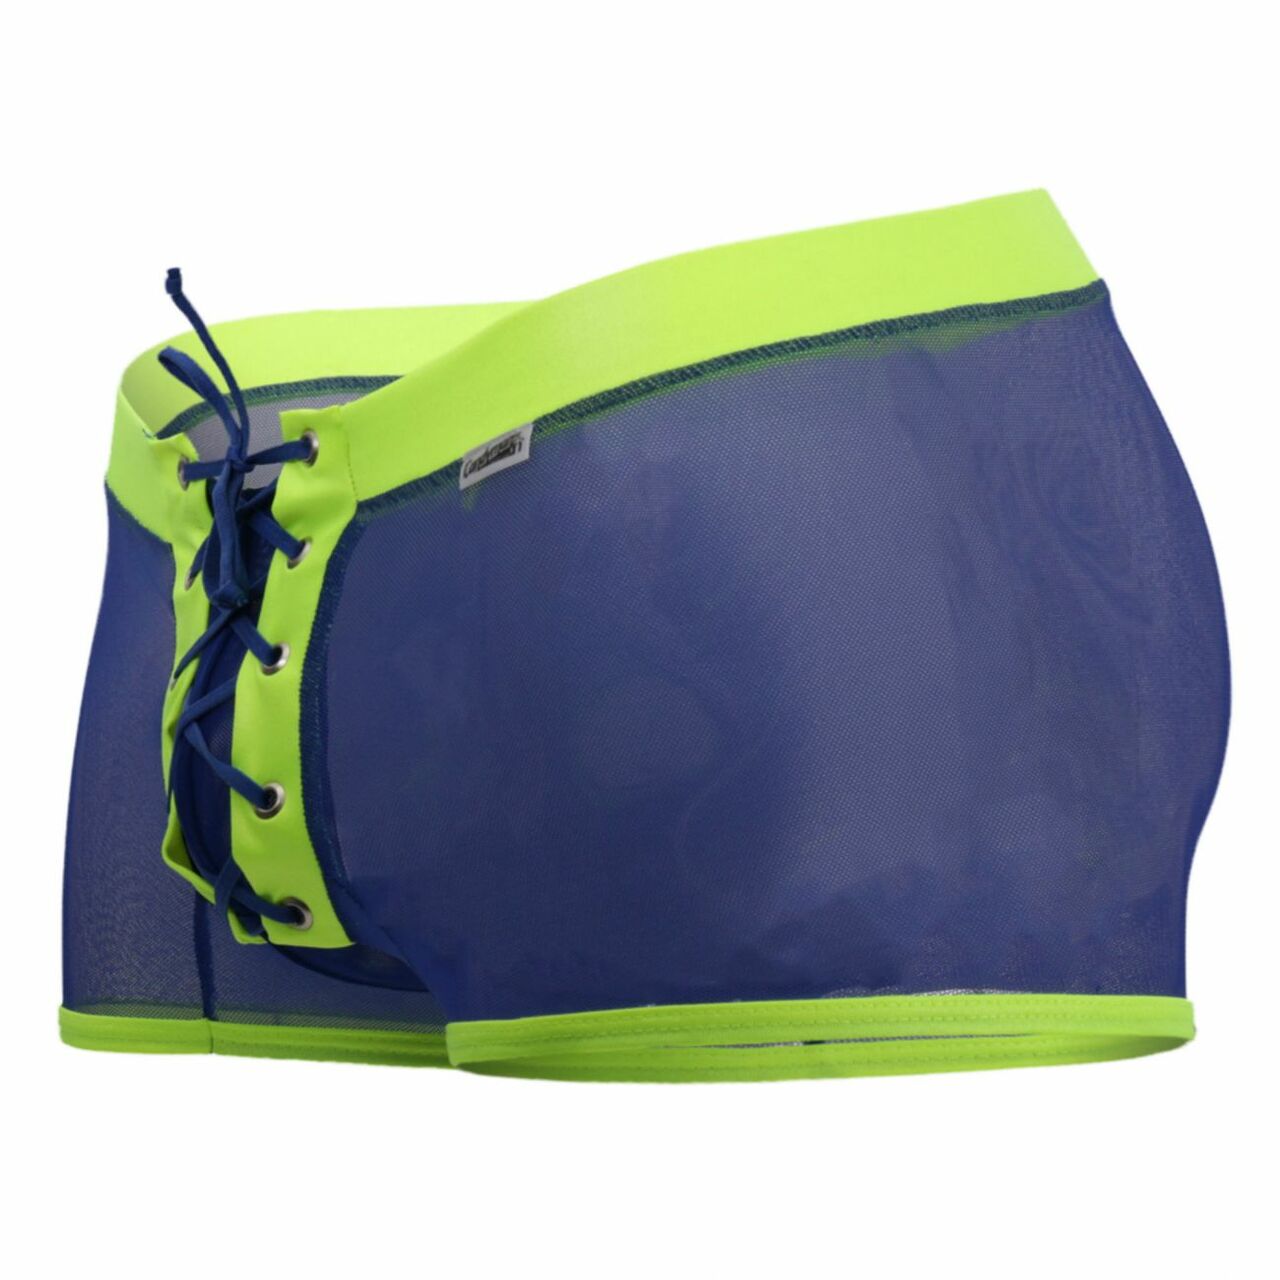 SALE - Mens Sheer Lace Up Front Boxer Briefs Blue and Green